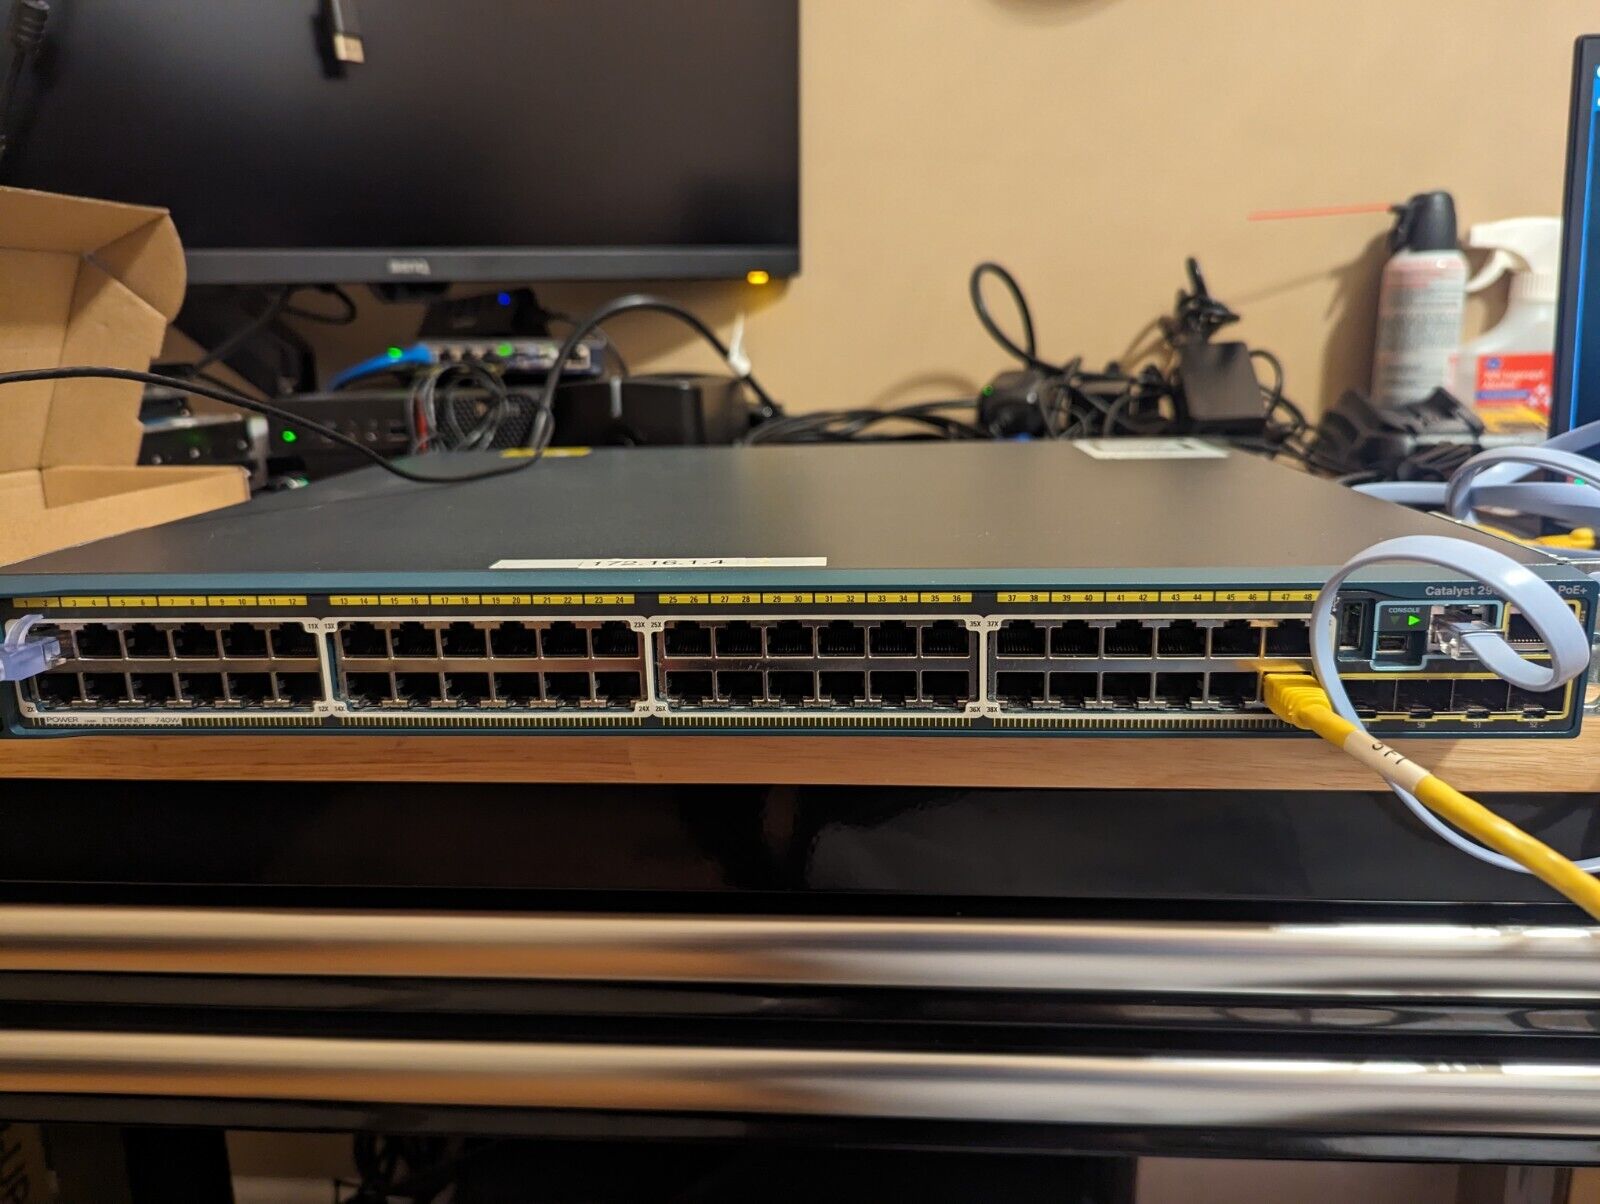 Cisco  Catalyst 2960 (WS-C2960S-48FPS-L) 48-Ports Rack-Mountable Switch Managed